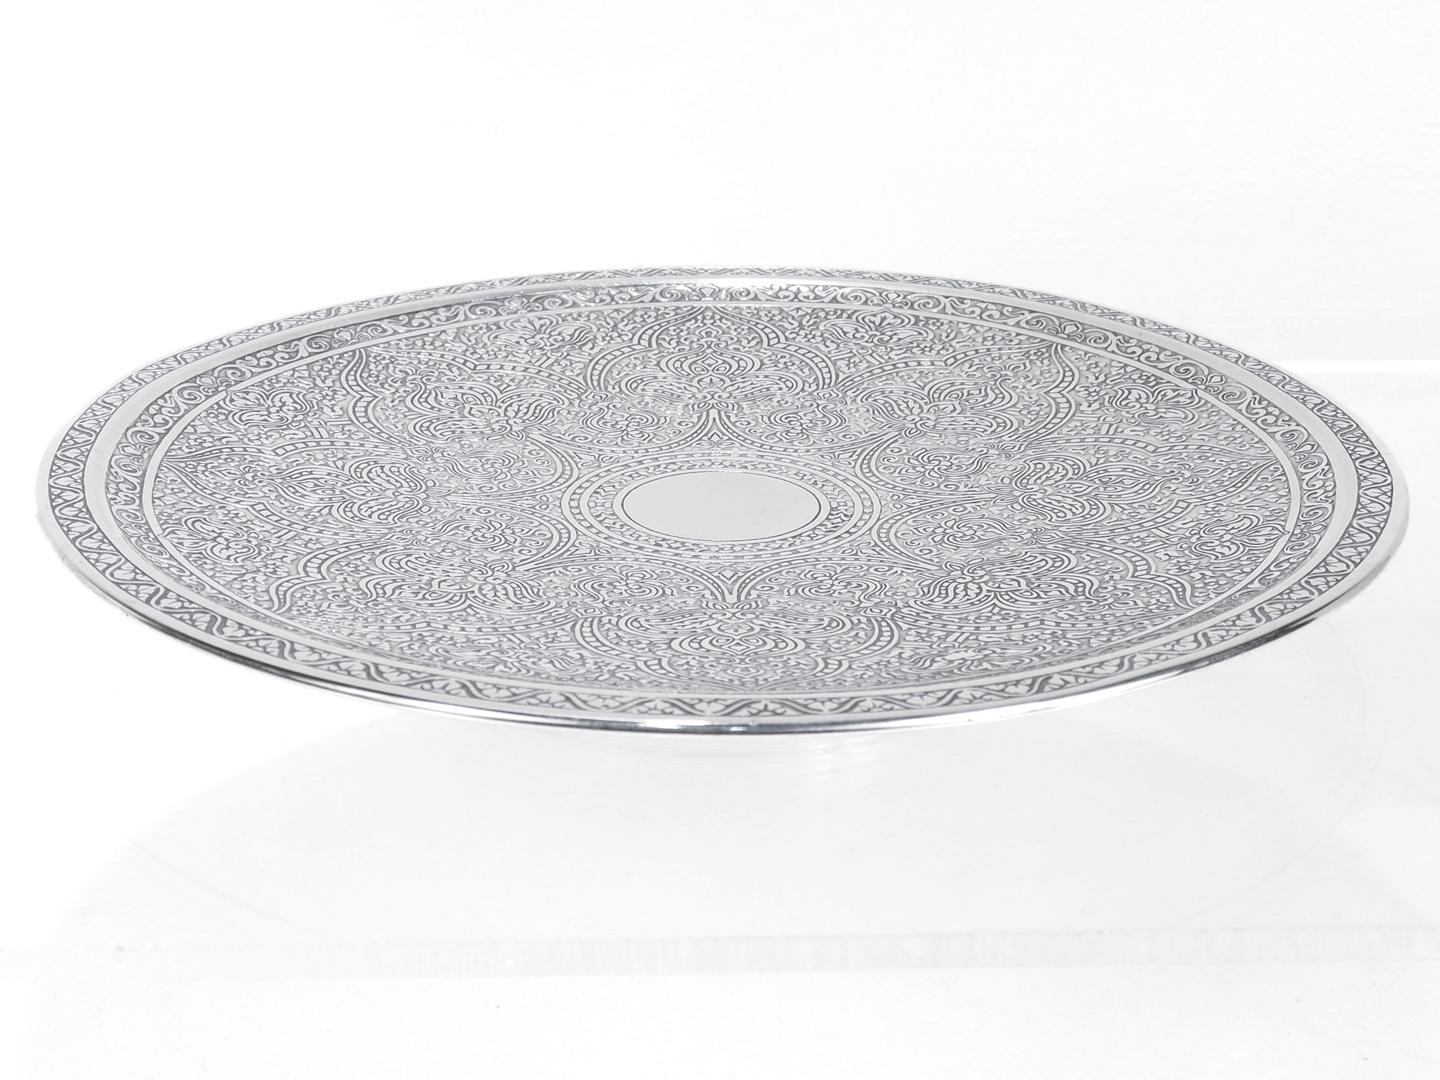 Women's or Men's Antique Tiffany & Co Sterling Silver Persian Acid-Etched Serving Tray/Cake Stand For Sale